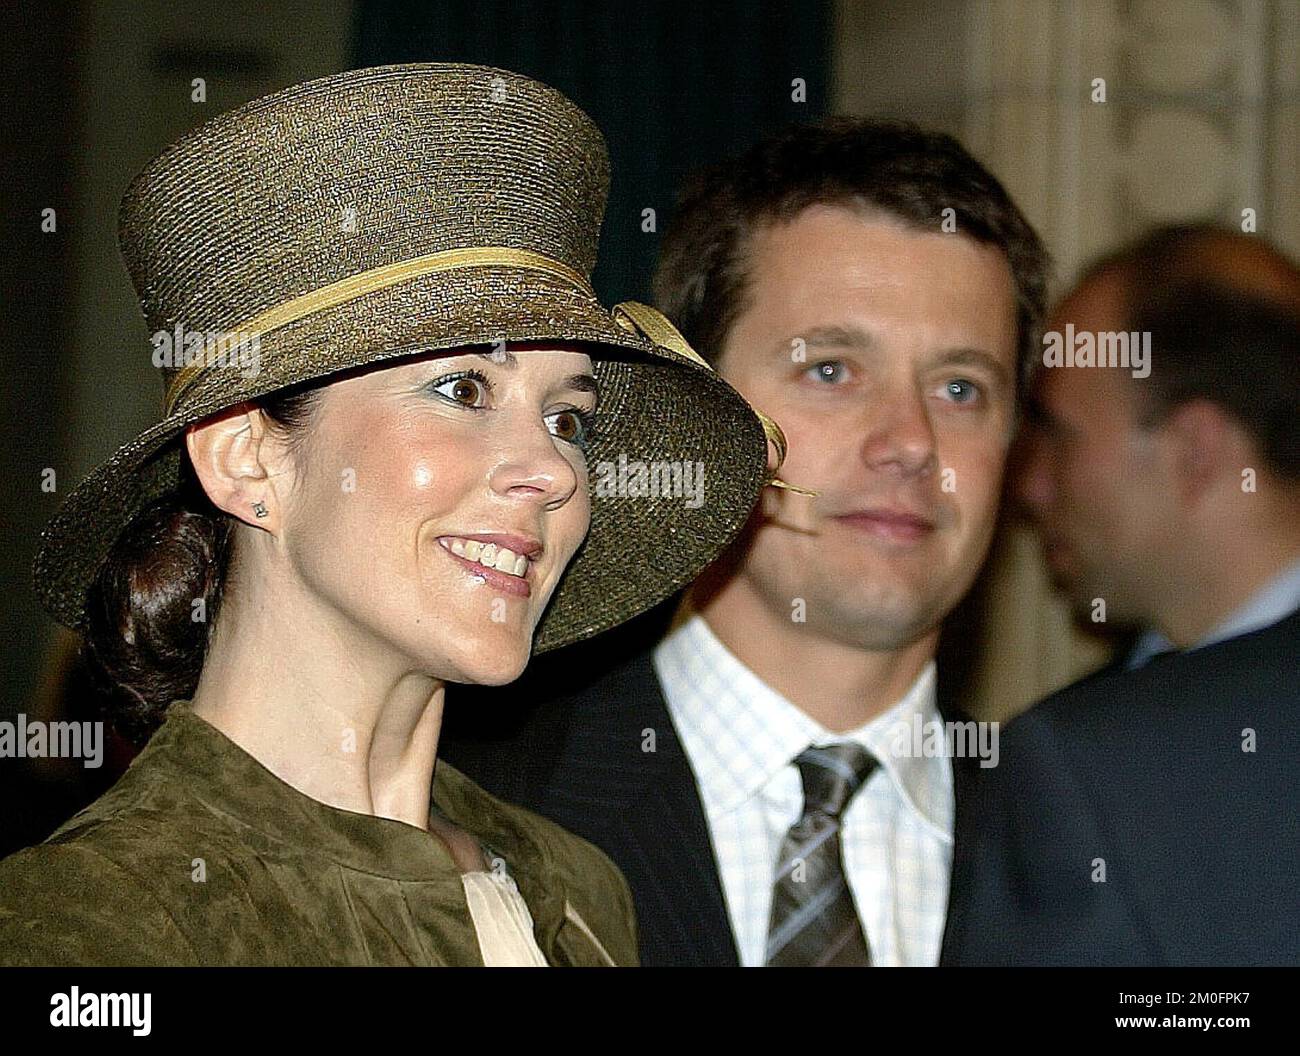 The wedding between Danish Crown Prince Frederik and Australian Miss Mary Donaldson takes place in the Cathedral of Copenhagen, Denmark Friday May 14 2004. Members of the European royal families, and many other nobilities, attend the wedding. Stock Photo